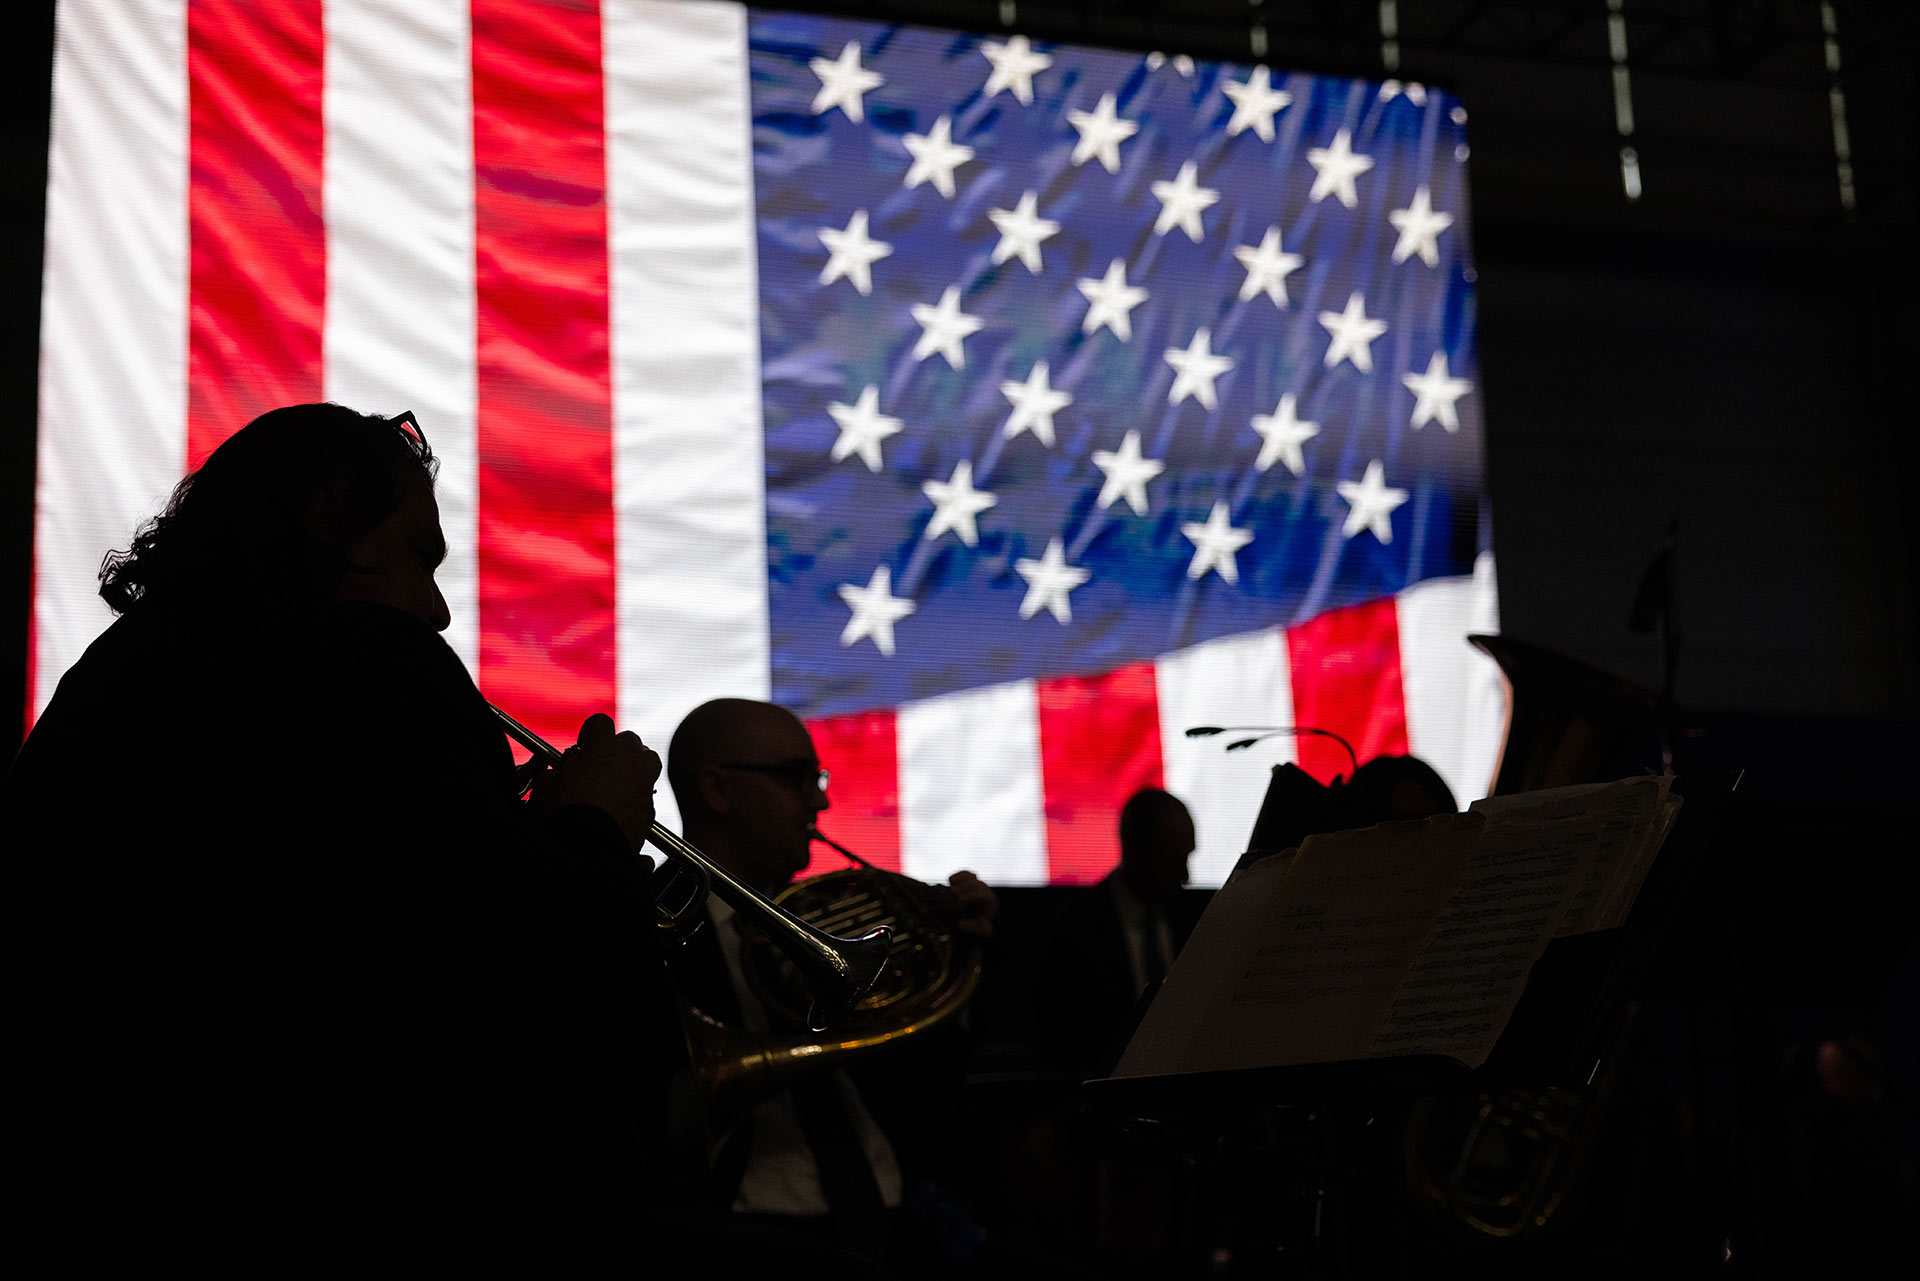 The American Flag with instrumentalists silhouetted in the foreground